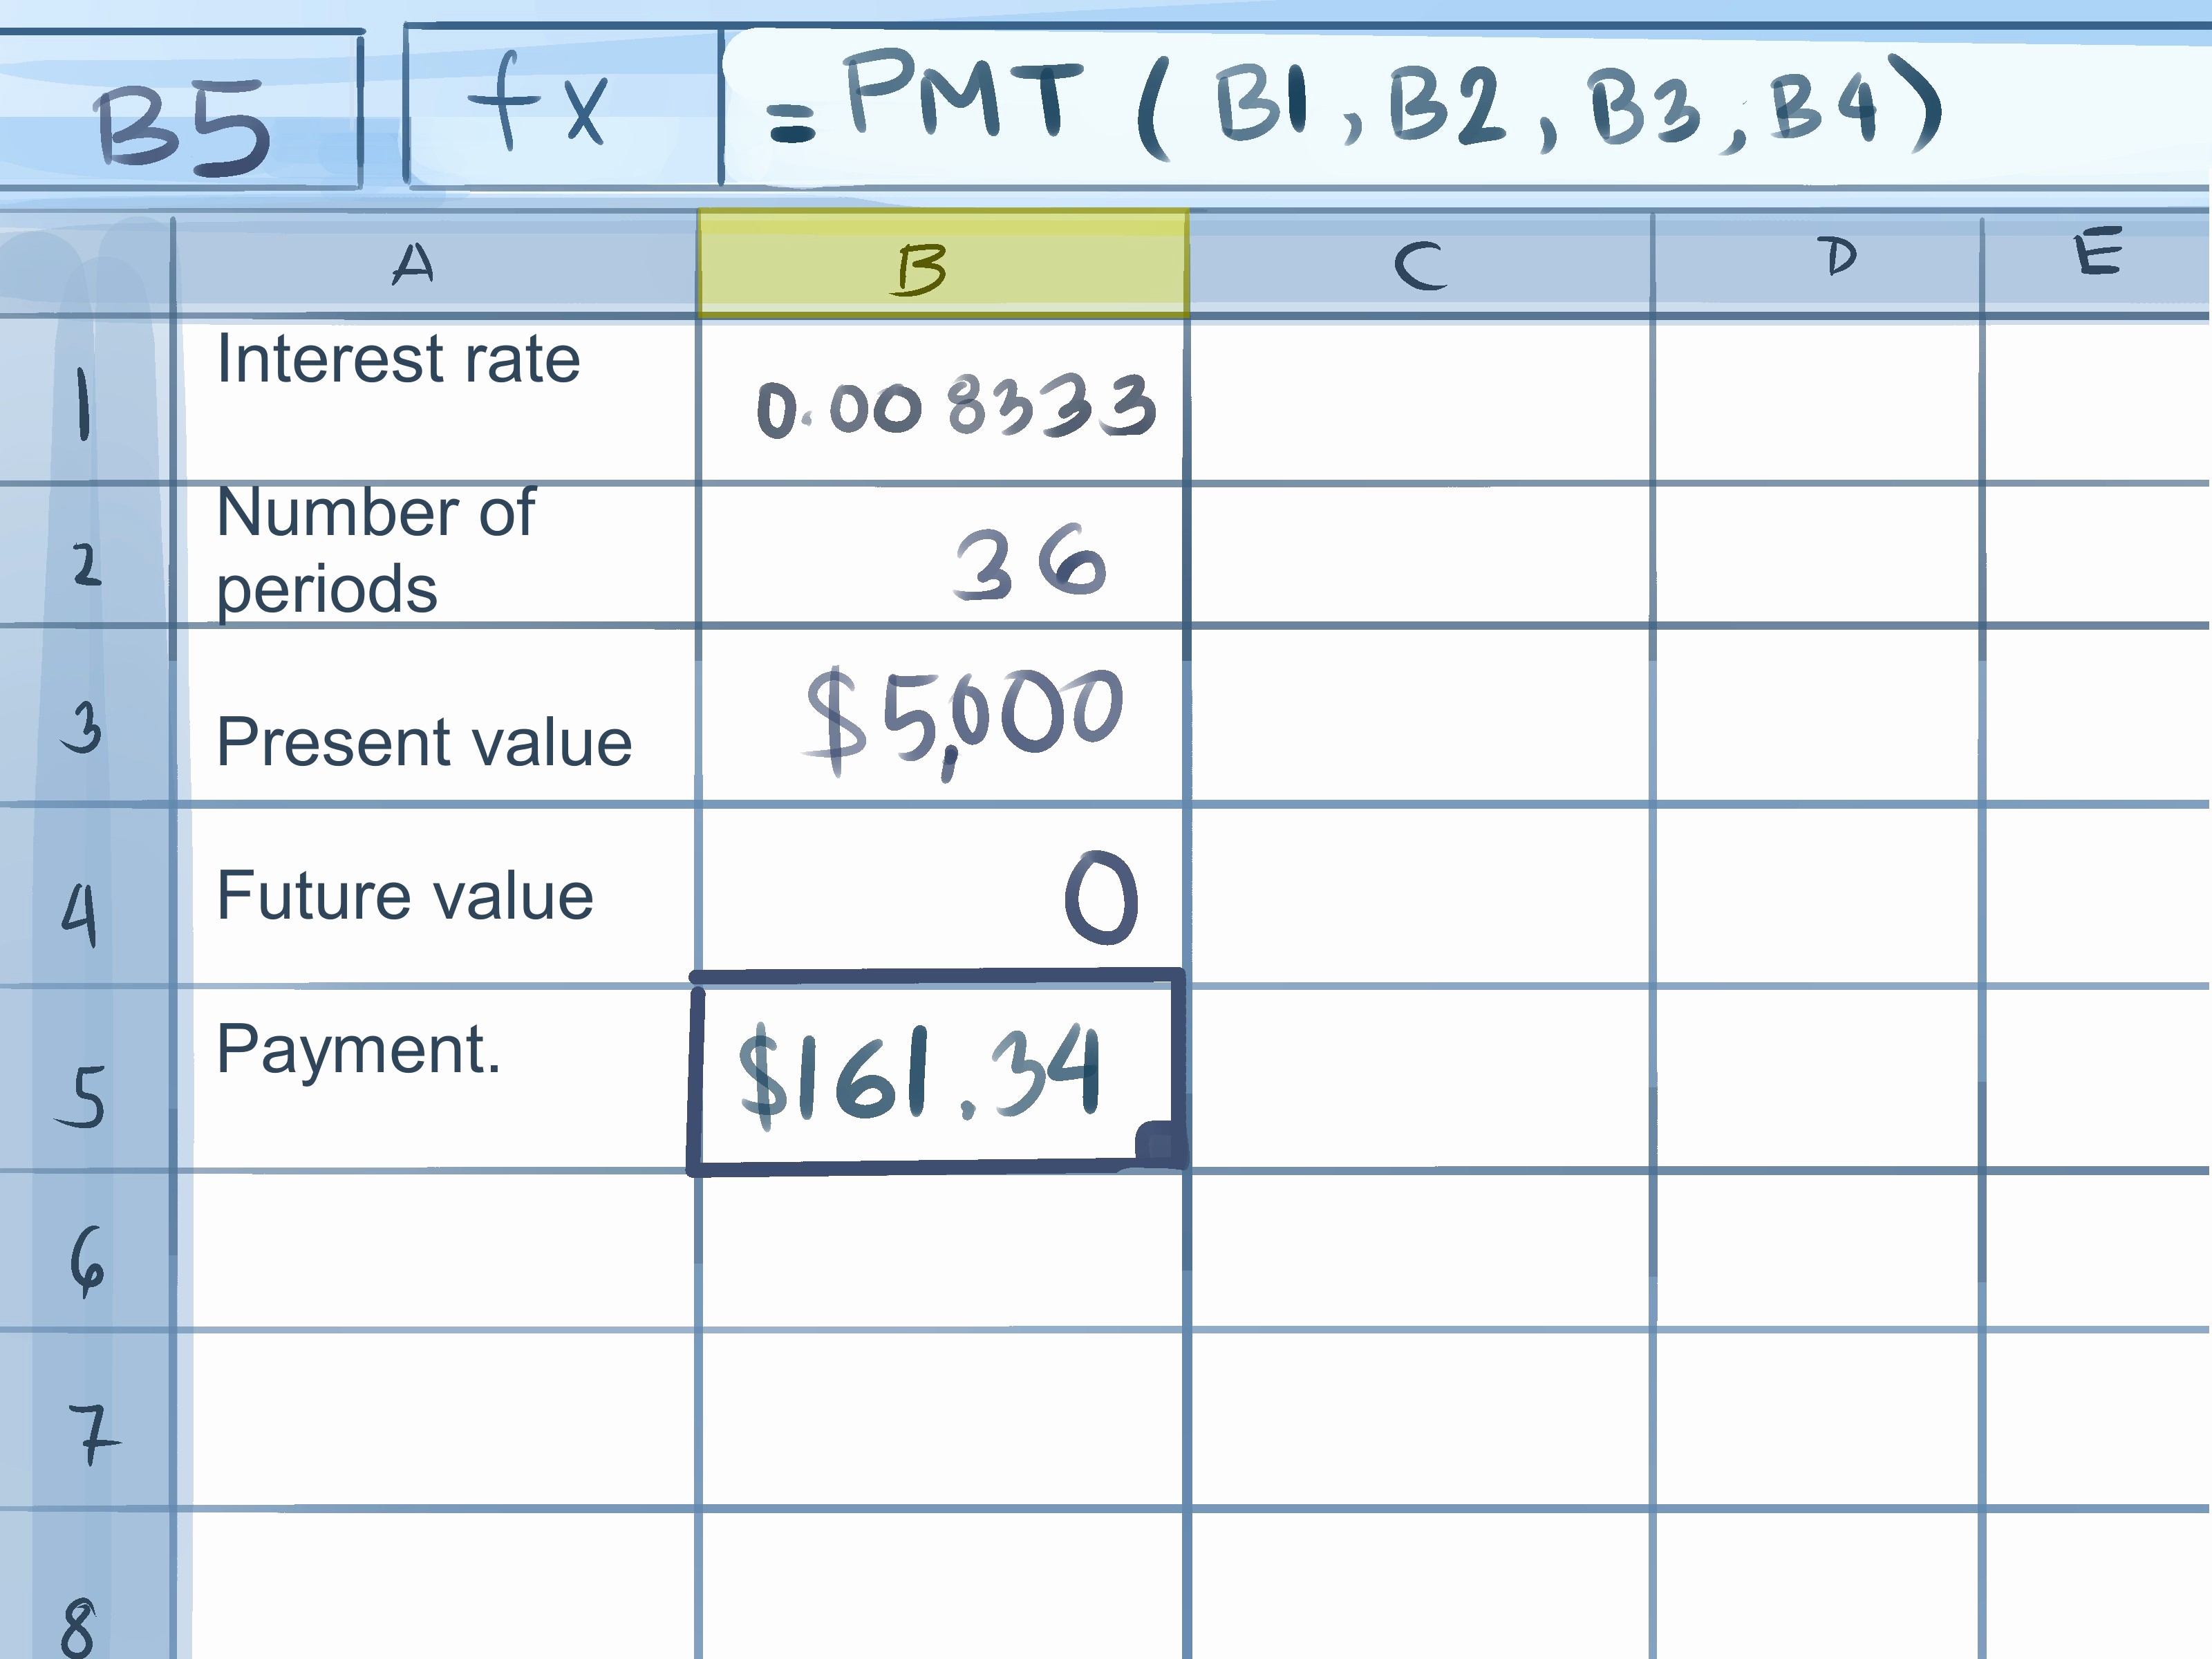 Credit Card Payment Excel Template Best Of How to Calculate Credit Card Payments In Excel 10 Steps